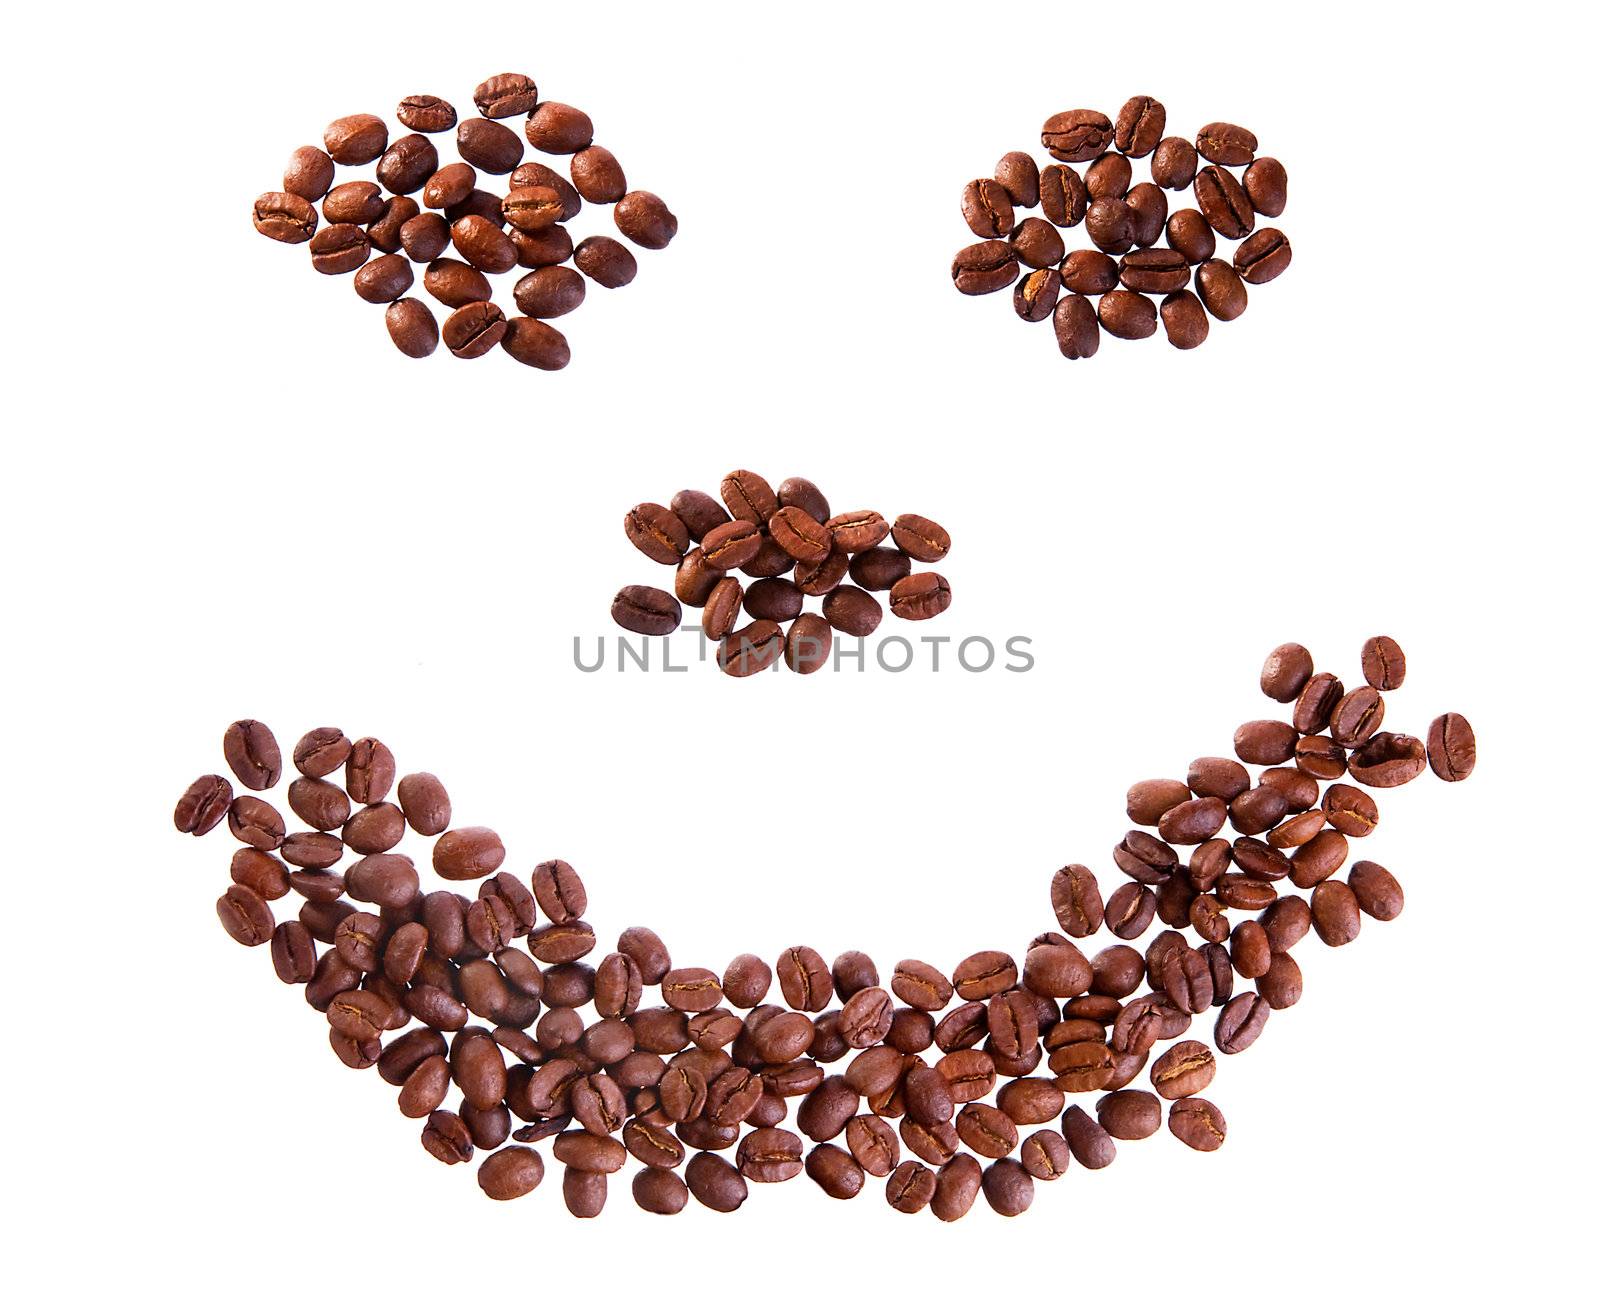 Roasted coffee beans placed in shape of smile on a white background